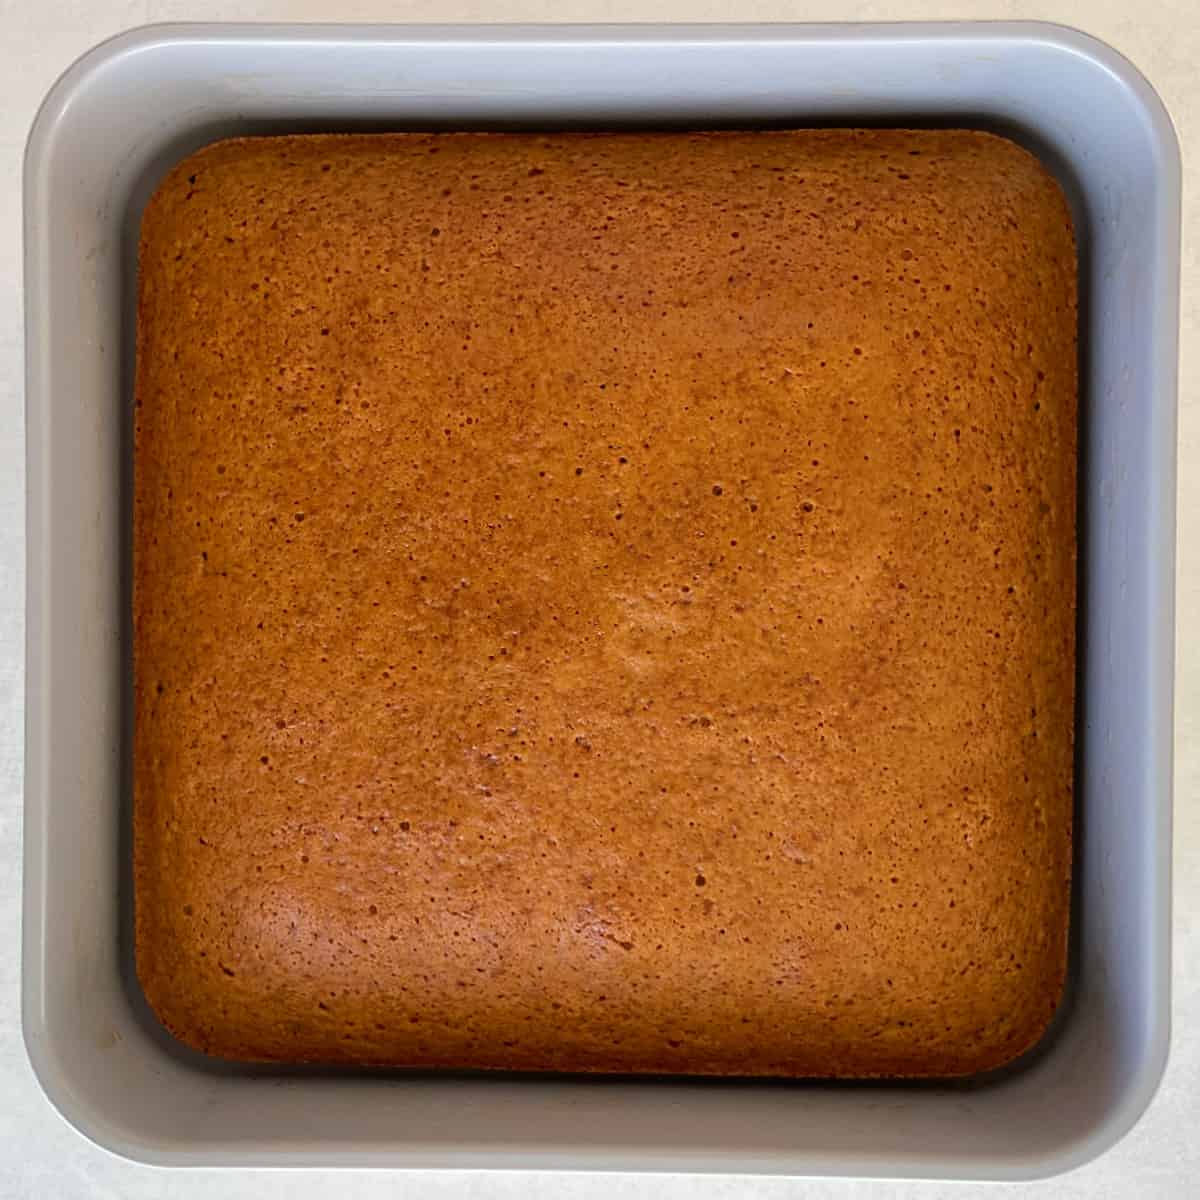 baked gingerbread cake in a pan.